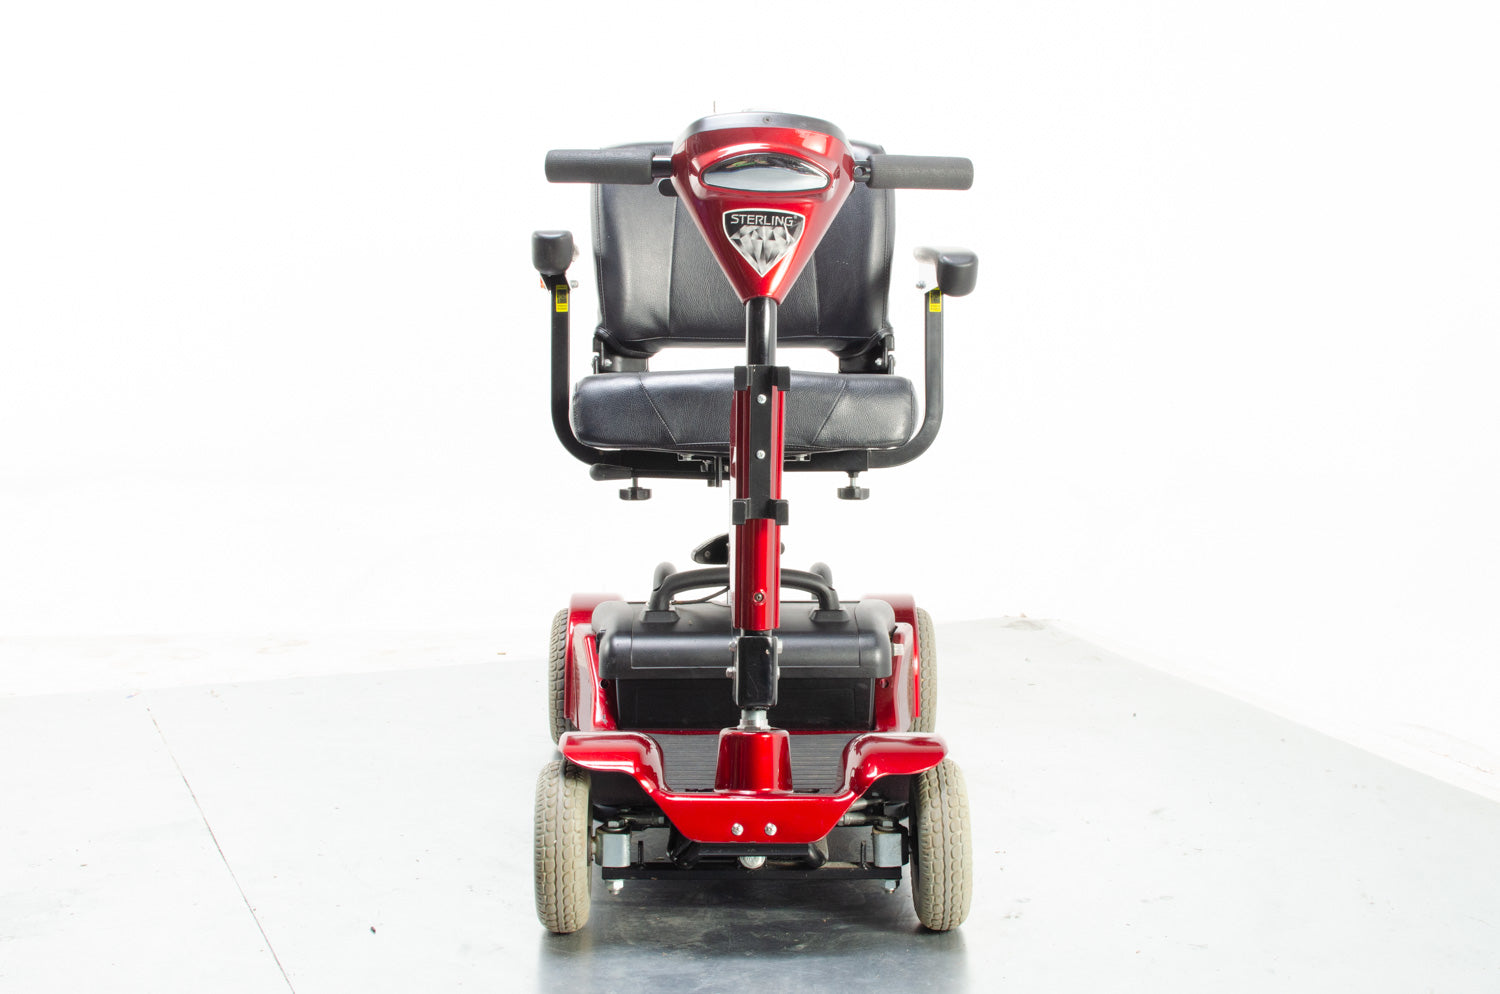 2008 Sterling Little Gem 4mph Transportable Boot Mobility Scooter from Sunrise Medical